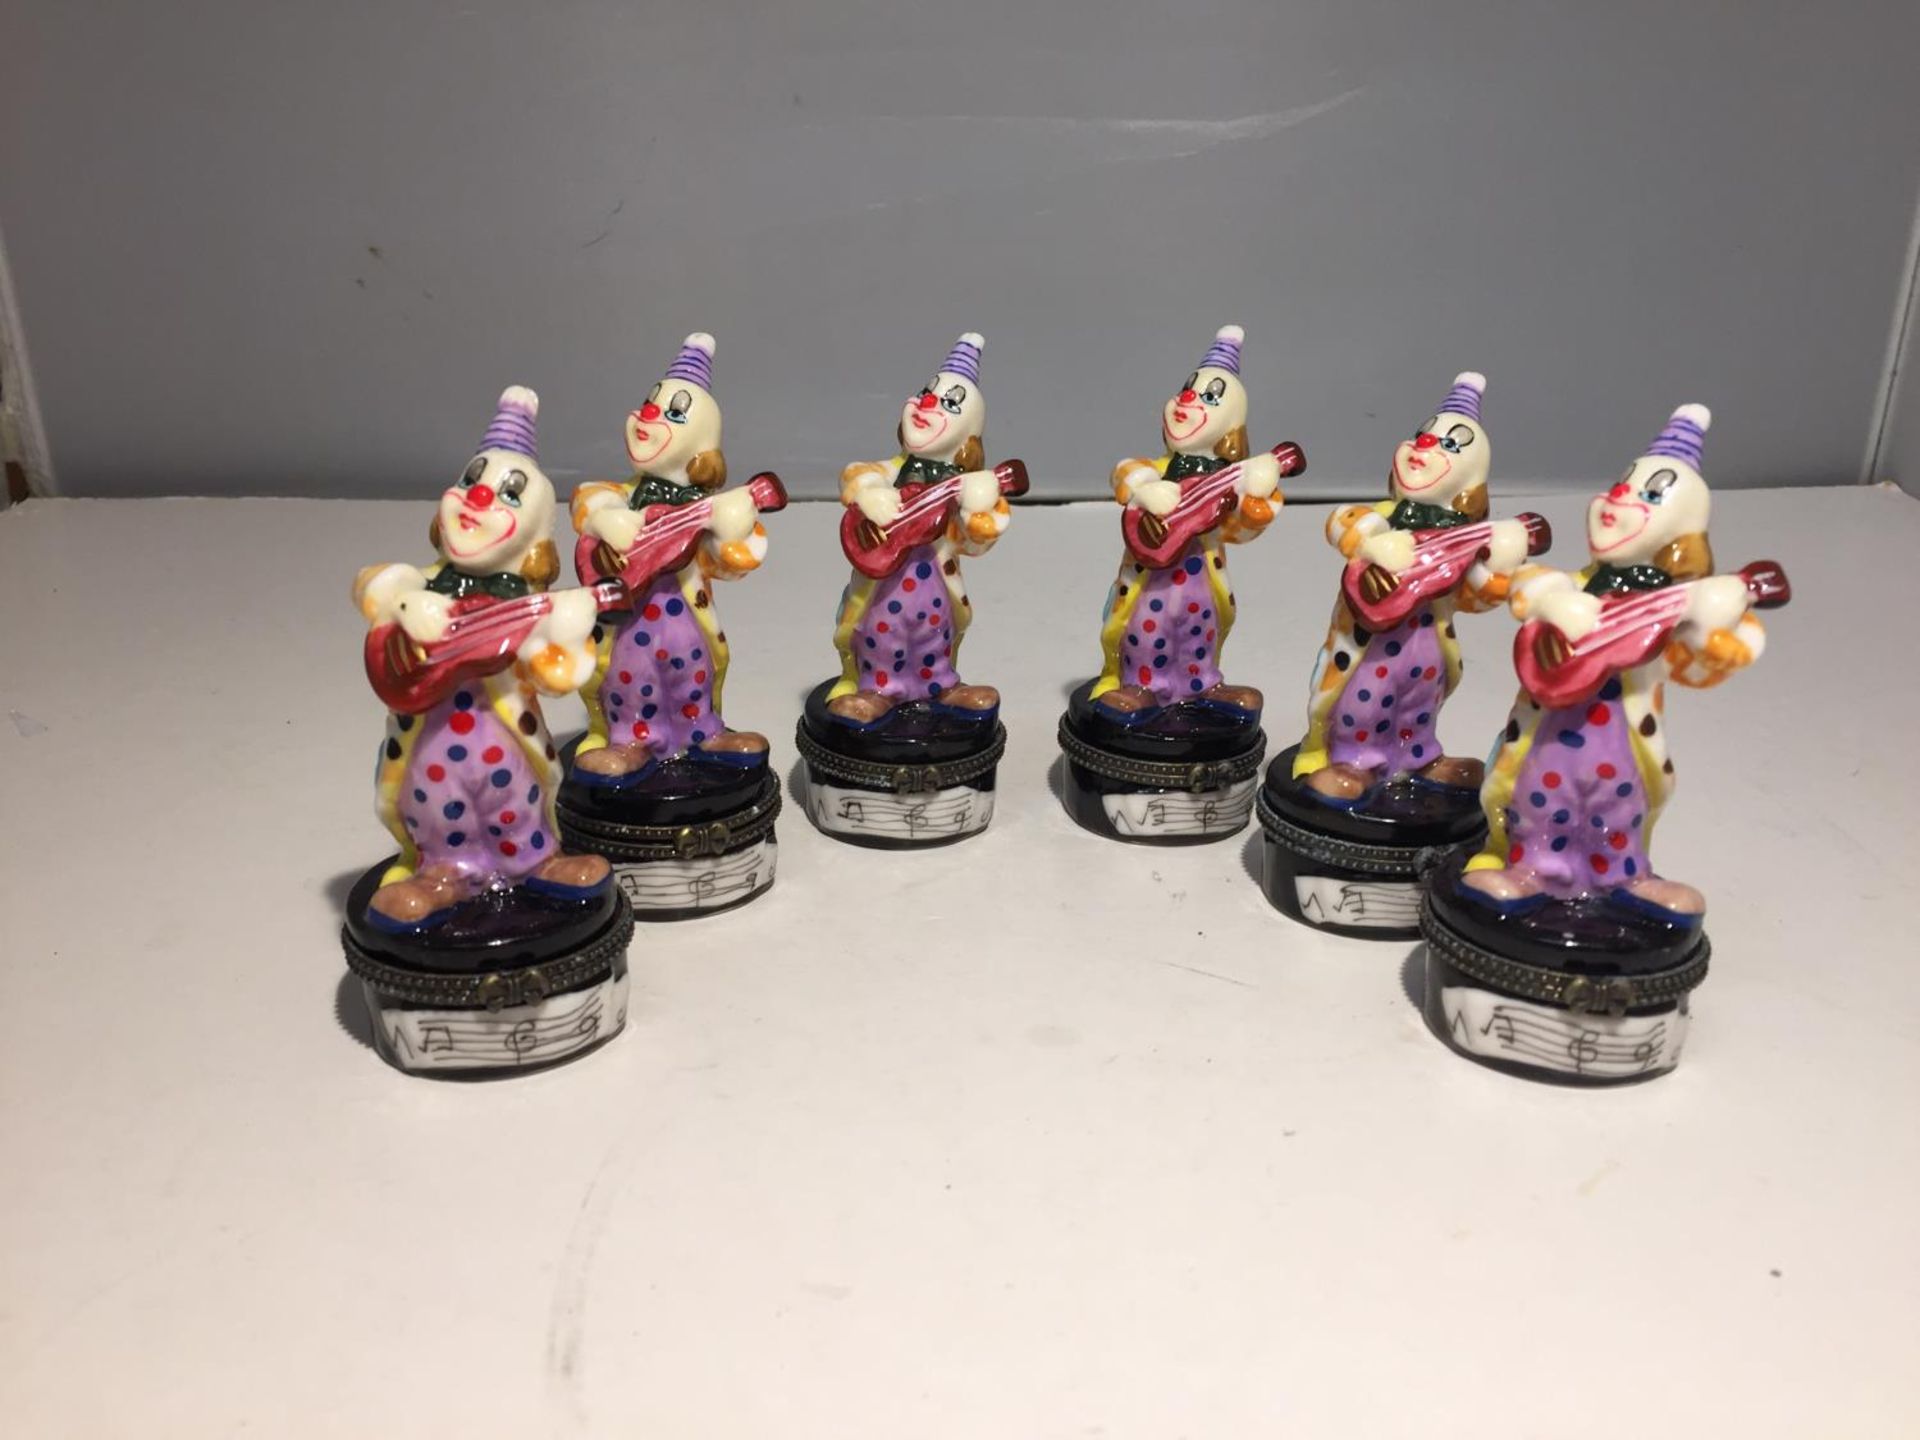 SIX TRINKET BOXES EACH WITH A GLASS CLOWN PLAYING GUITAR FIGURE